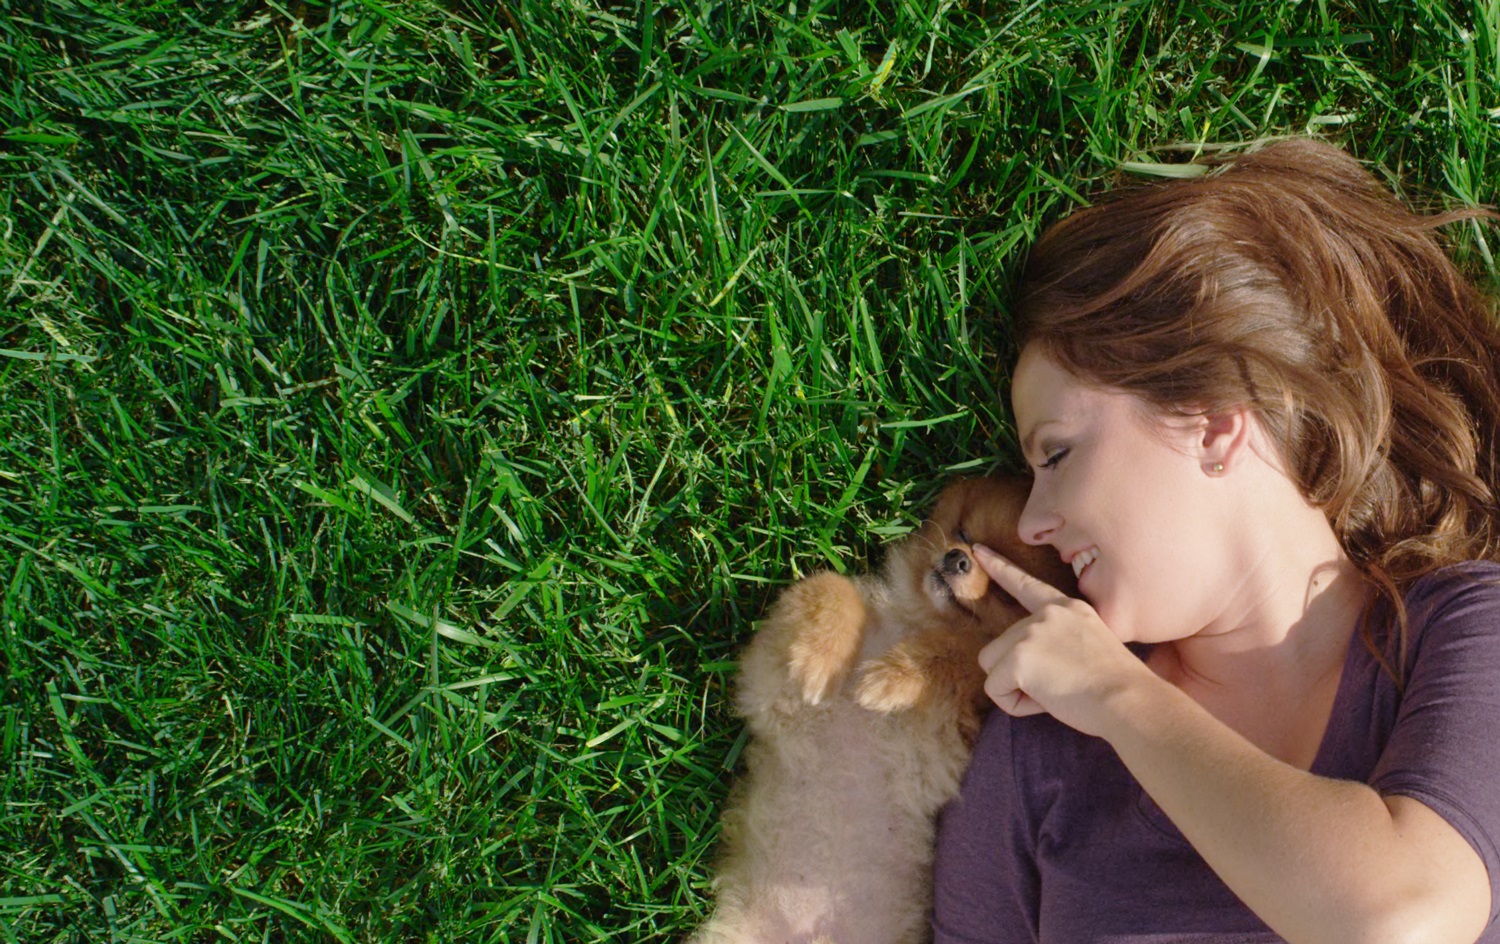 Pretty Woman playing with cute puppy on manicured green grass showing lawn care in Boulder